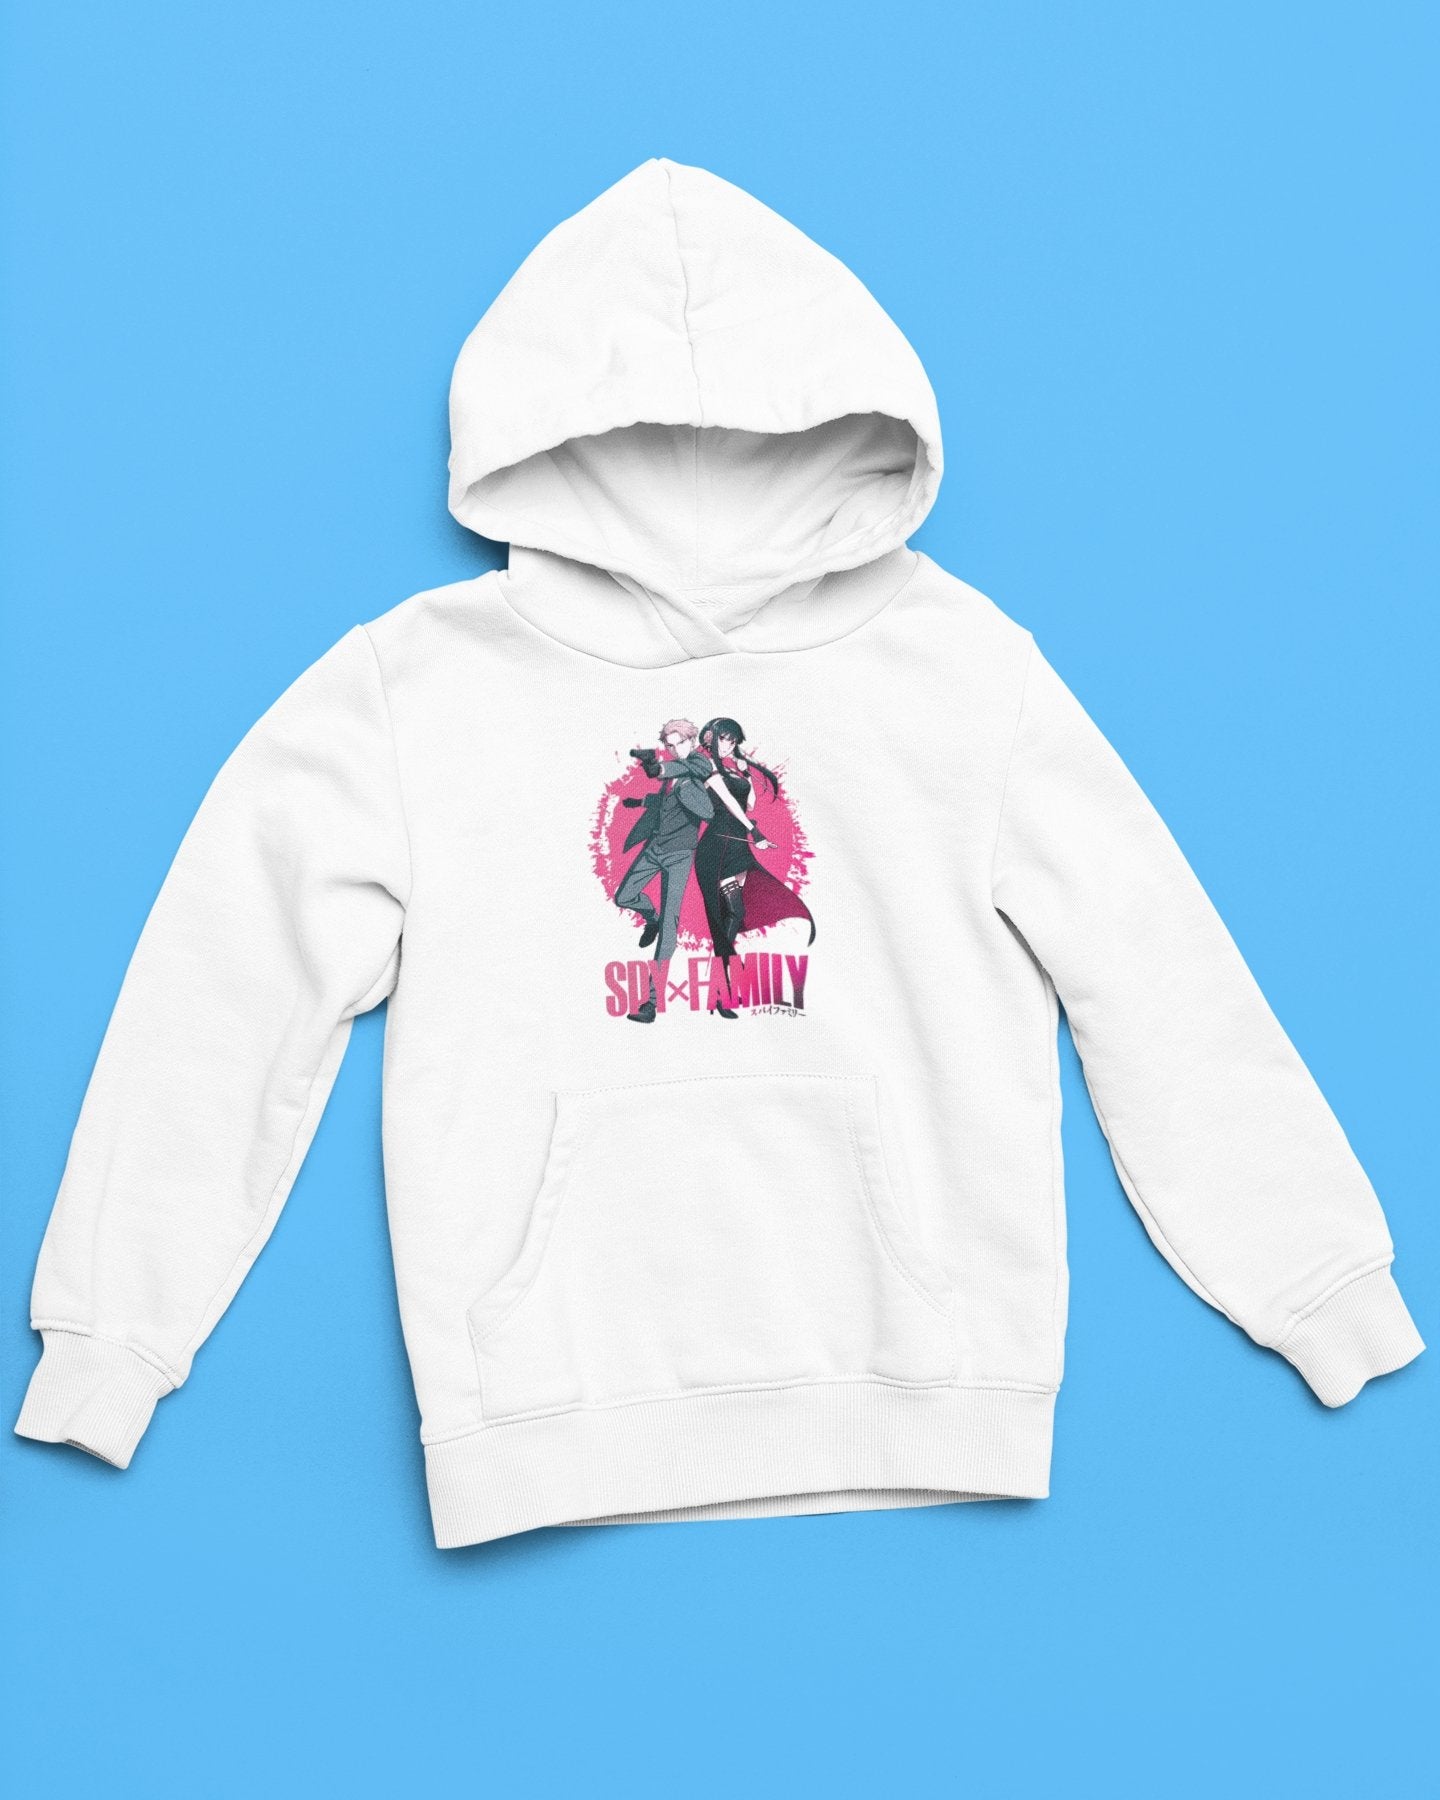 Loid Forger and Yor Forger Spy x Family Anime Hoodie - One Punch Fits